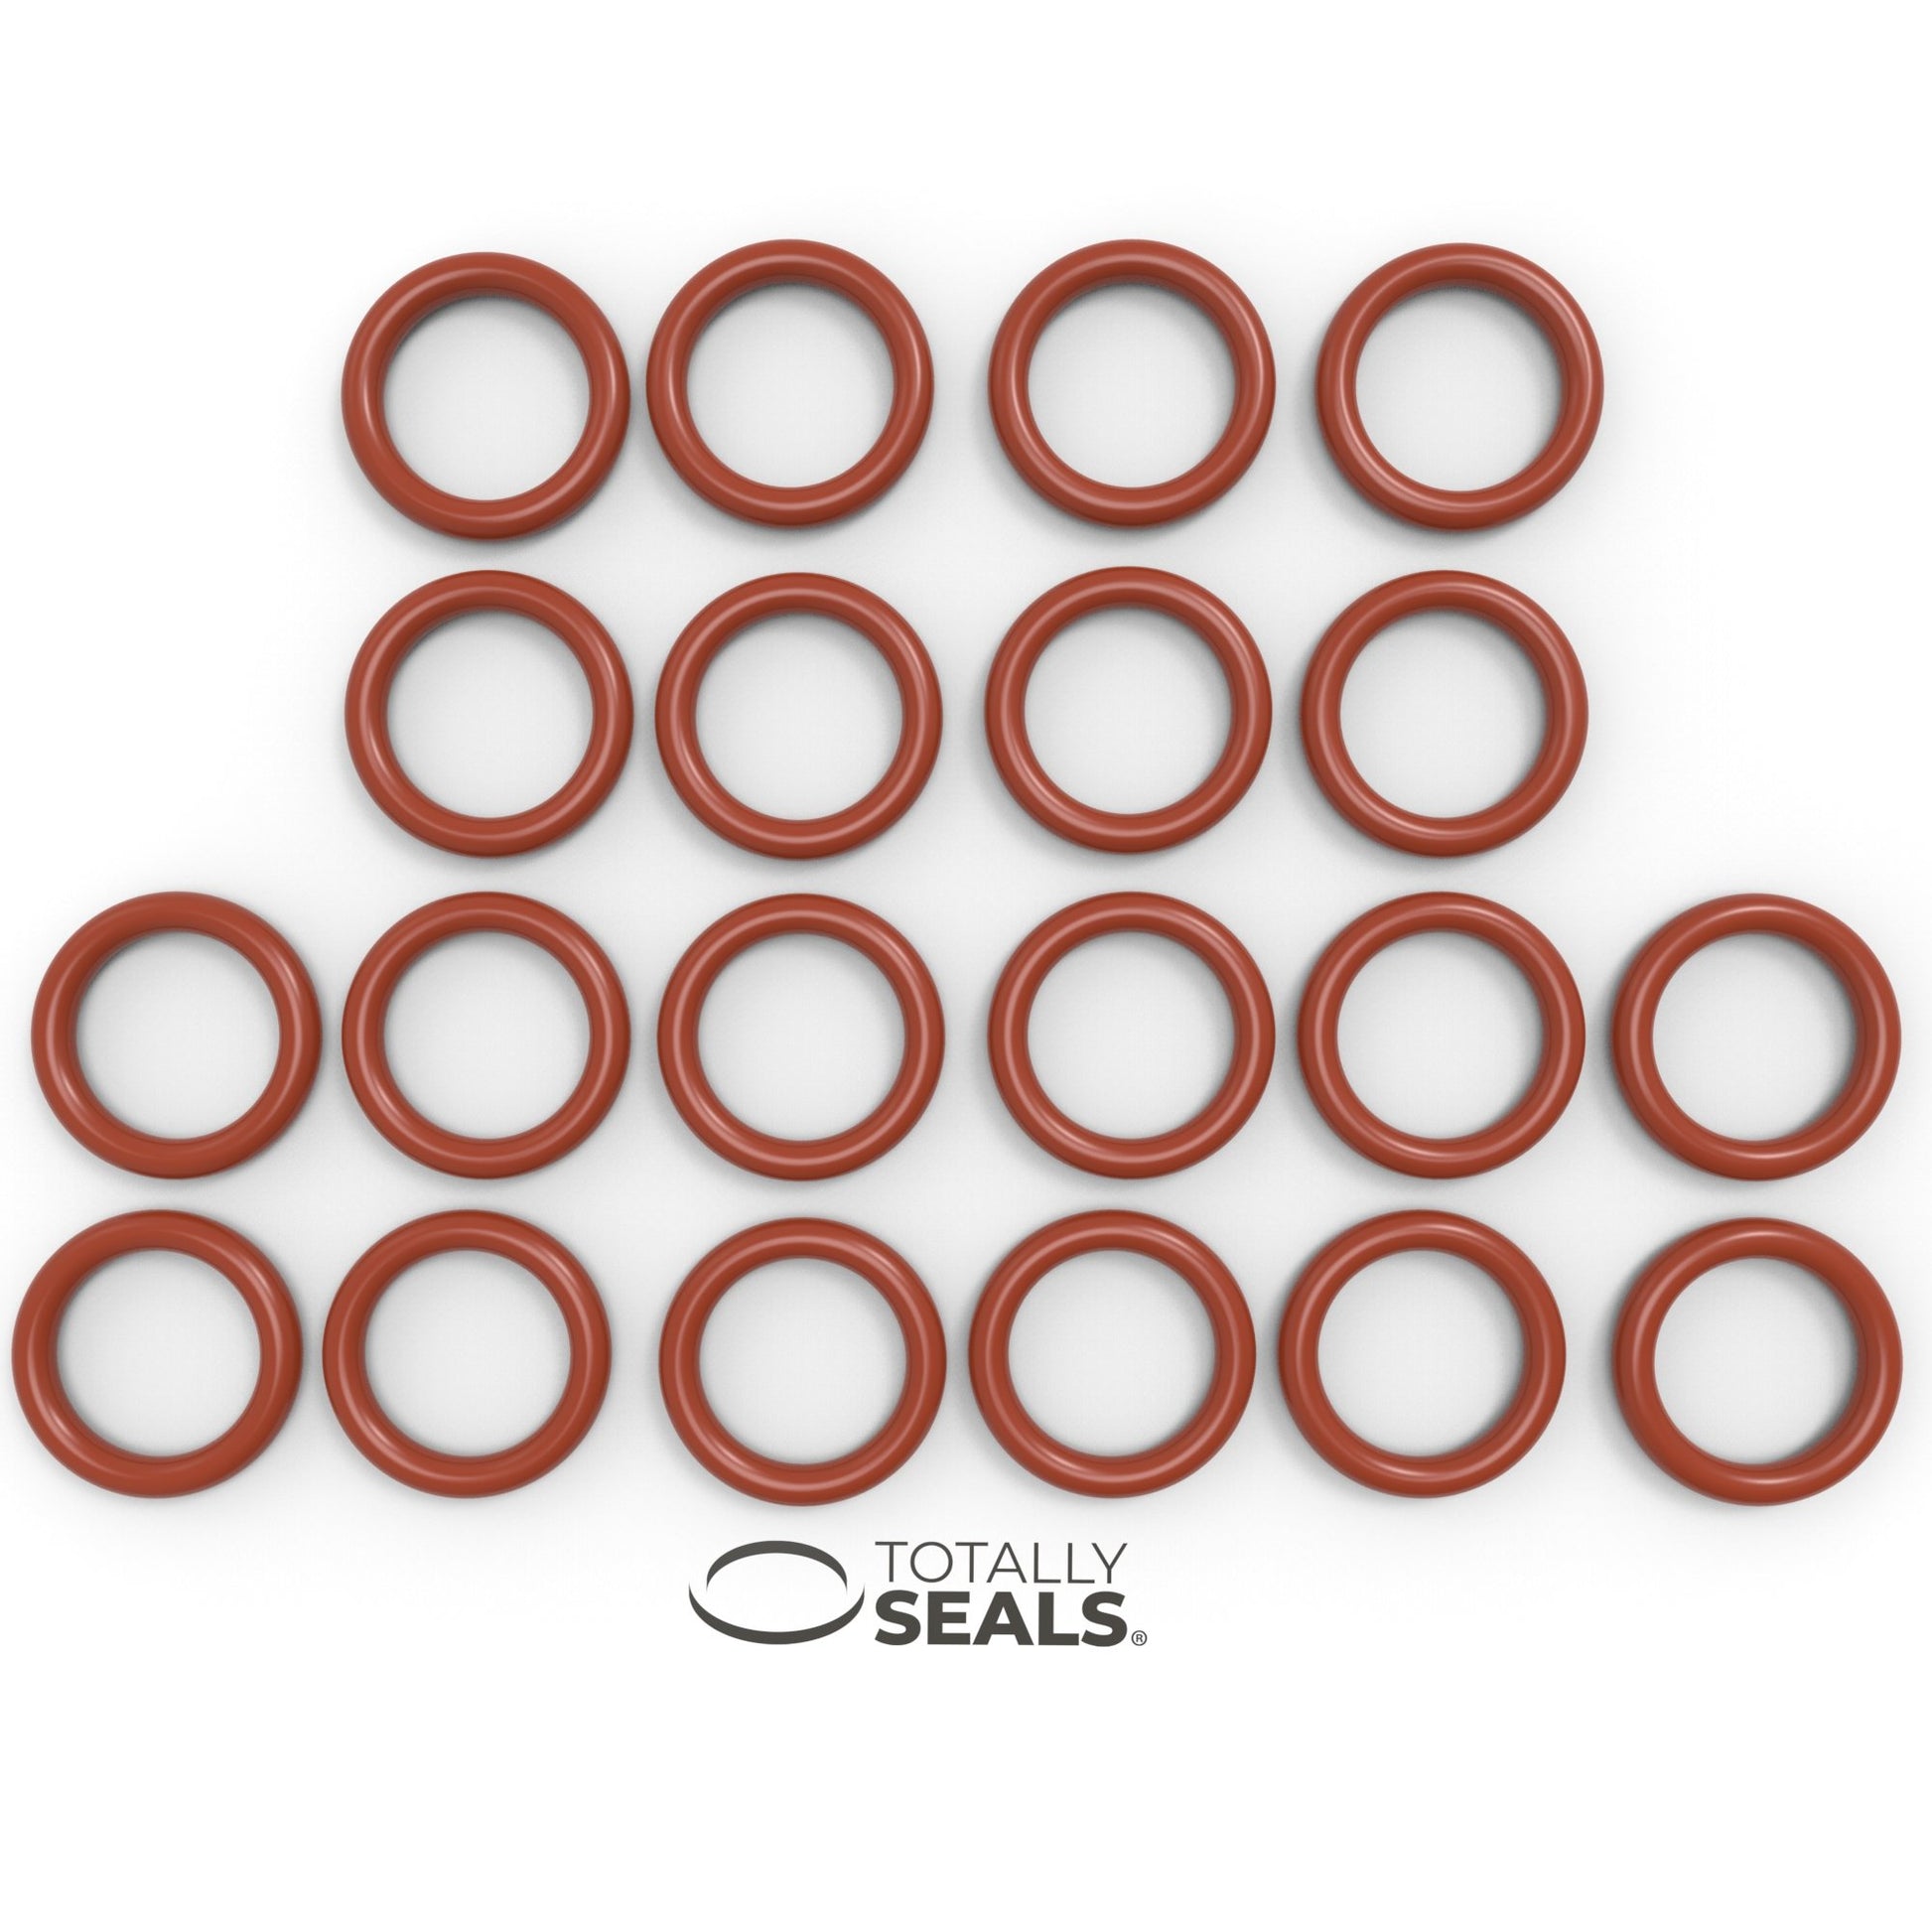 11mm x 2.5mm (16mm OD) Silicone O-Rings - Totally Seals®